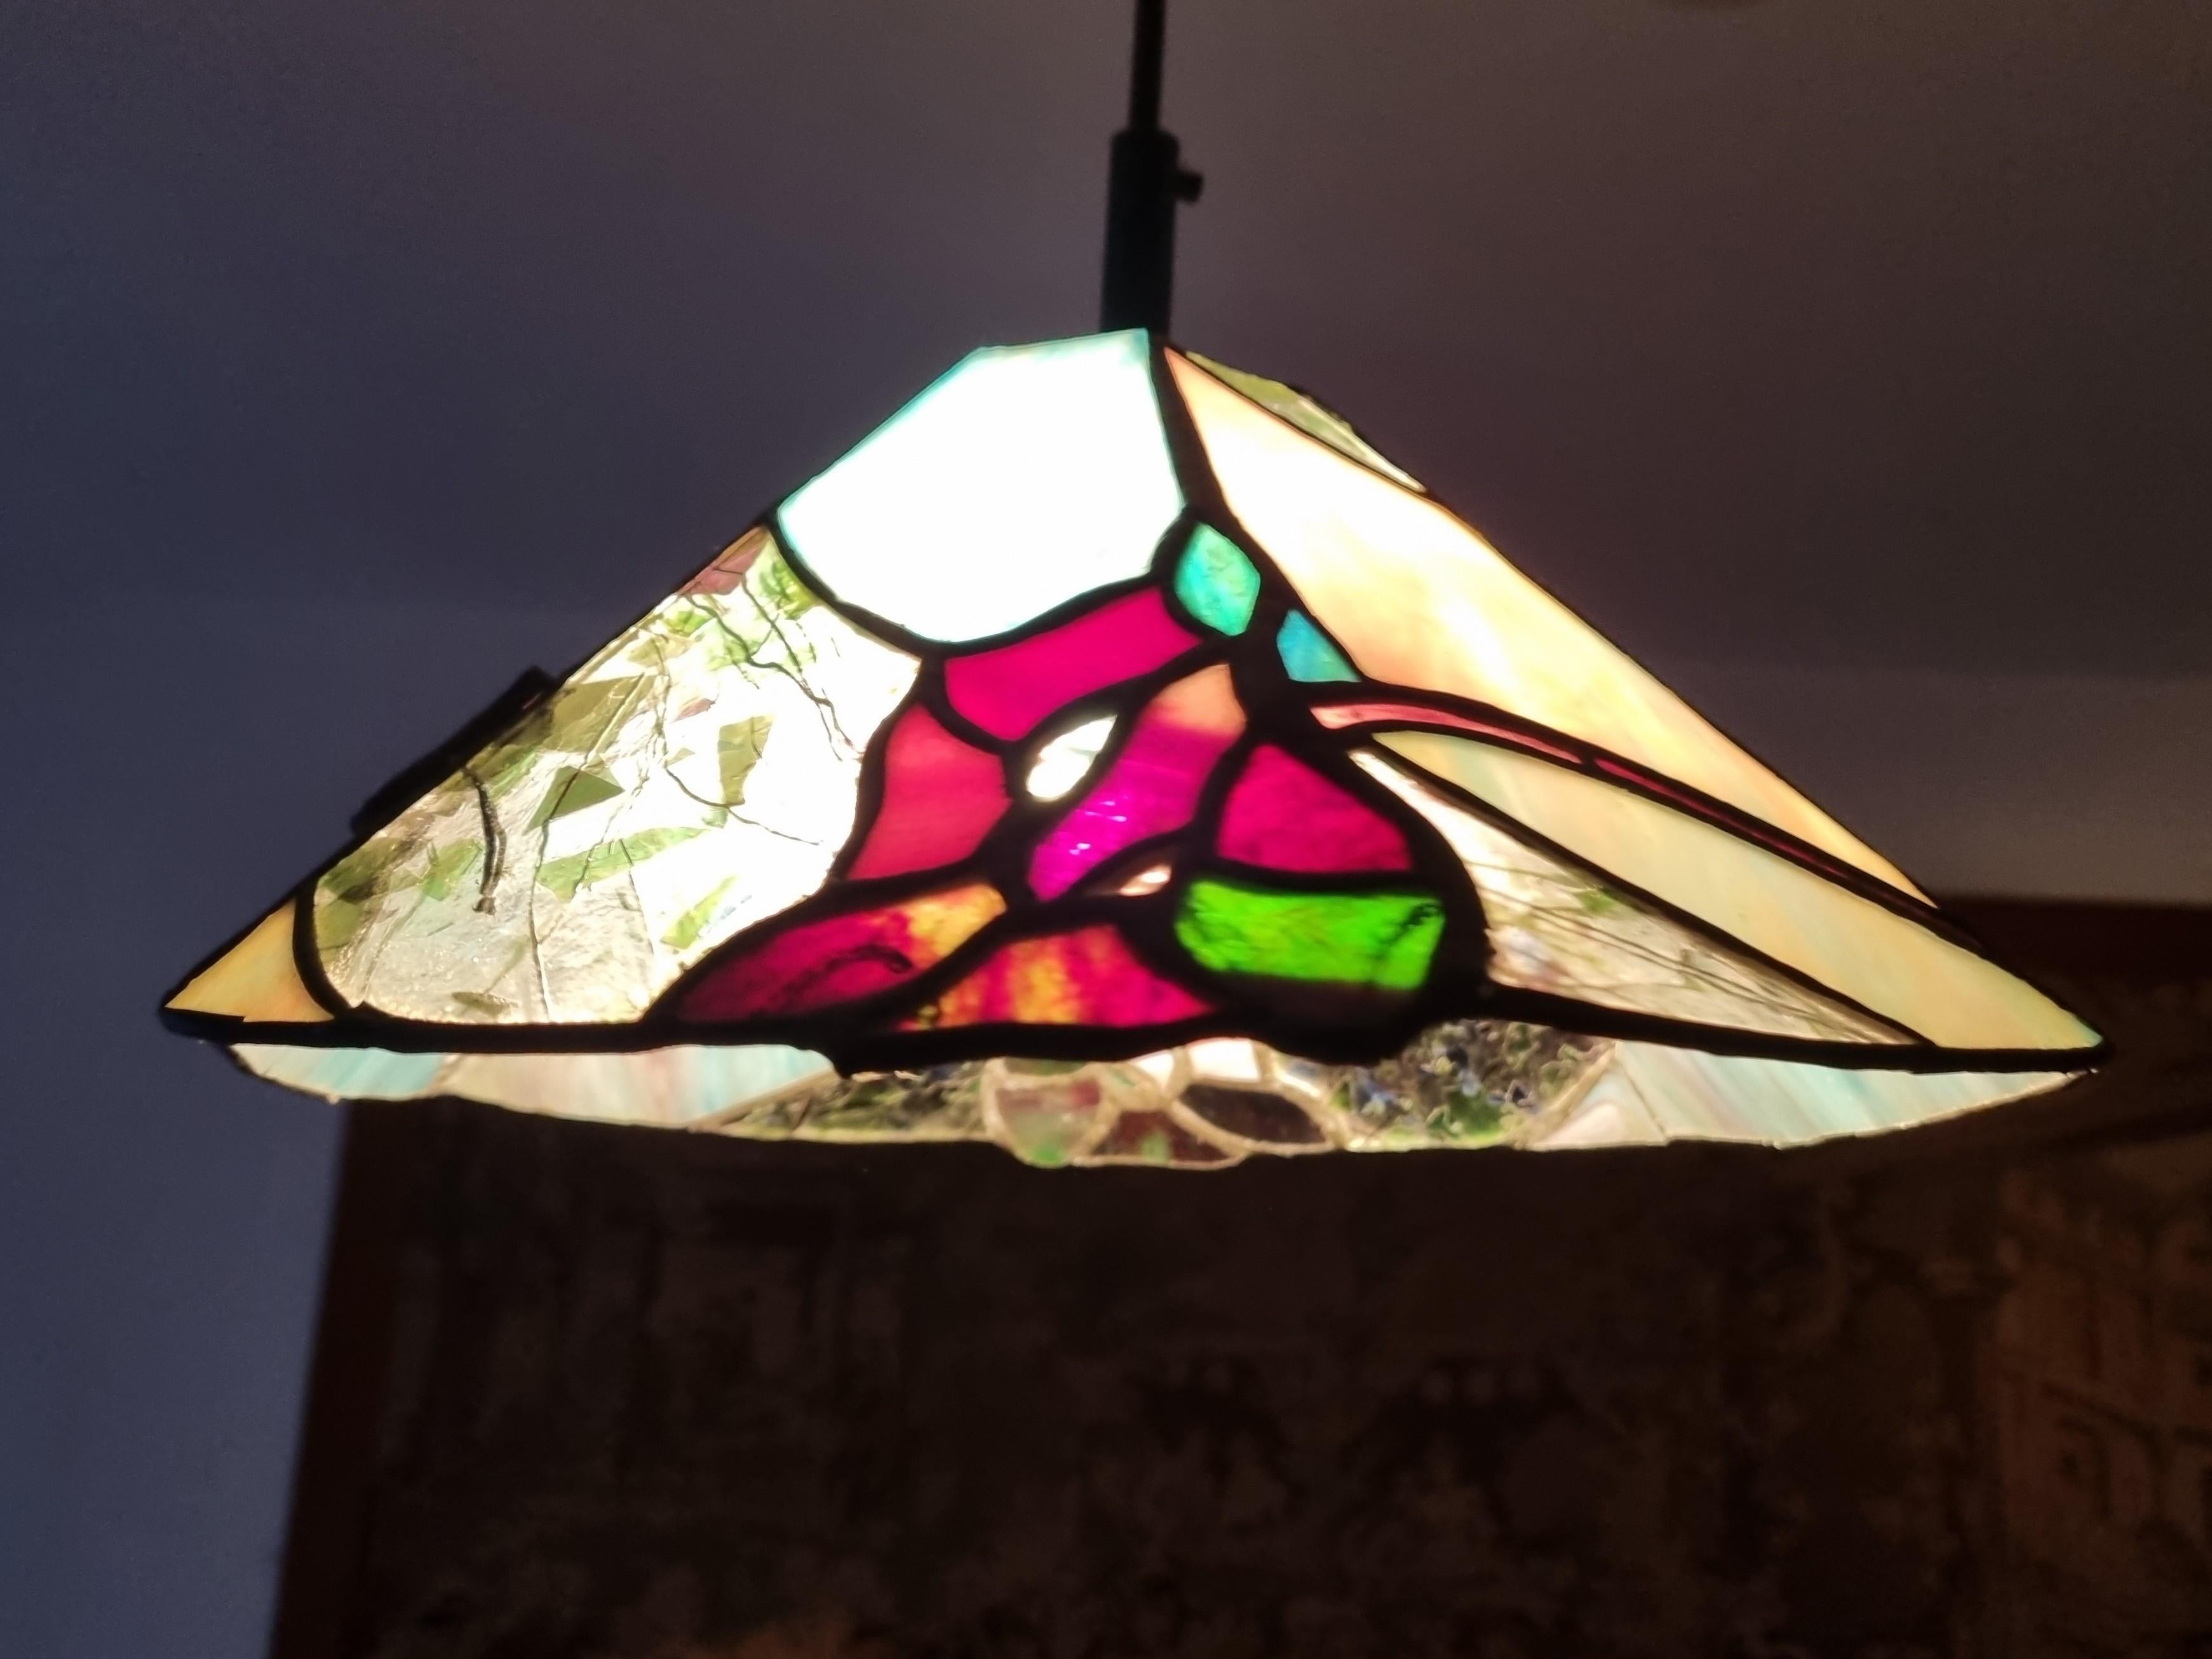 Belle Epoque Style Hanging Lamp Made of Handmade Tiffany Glass In Excellent Condition For Sale In Berlin, DE